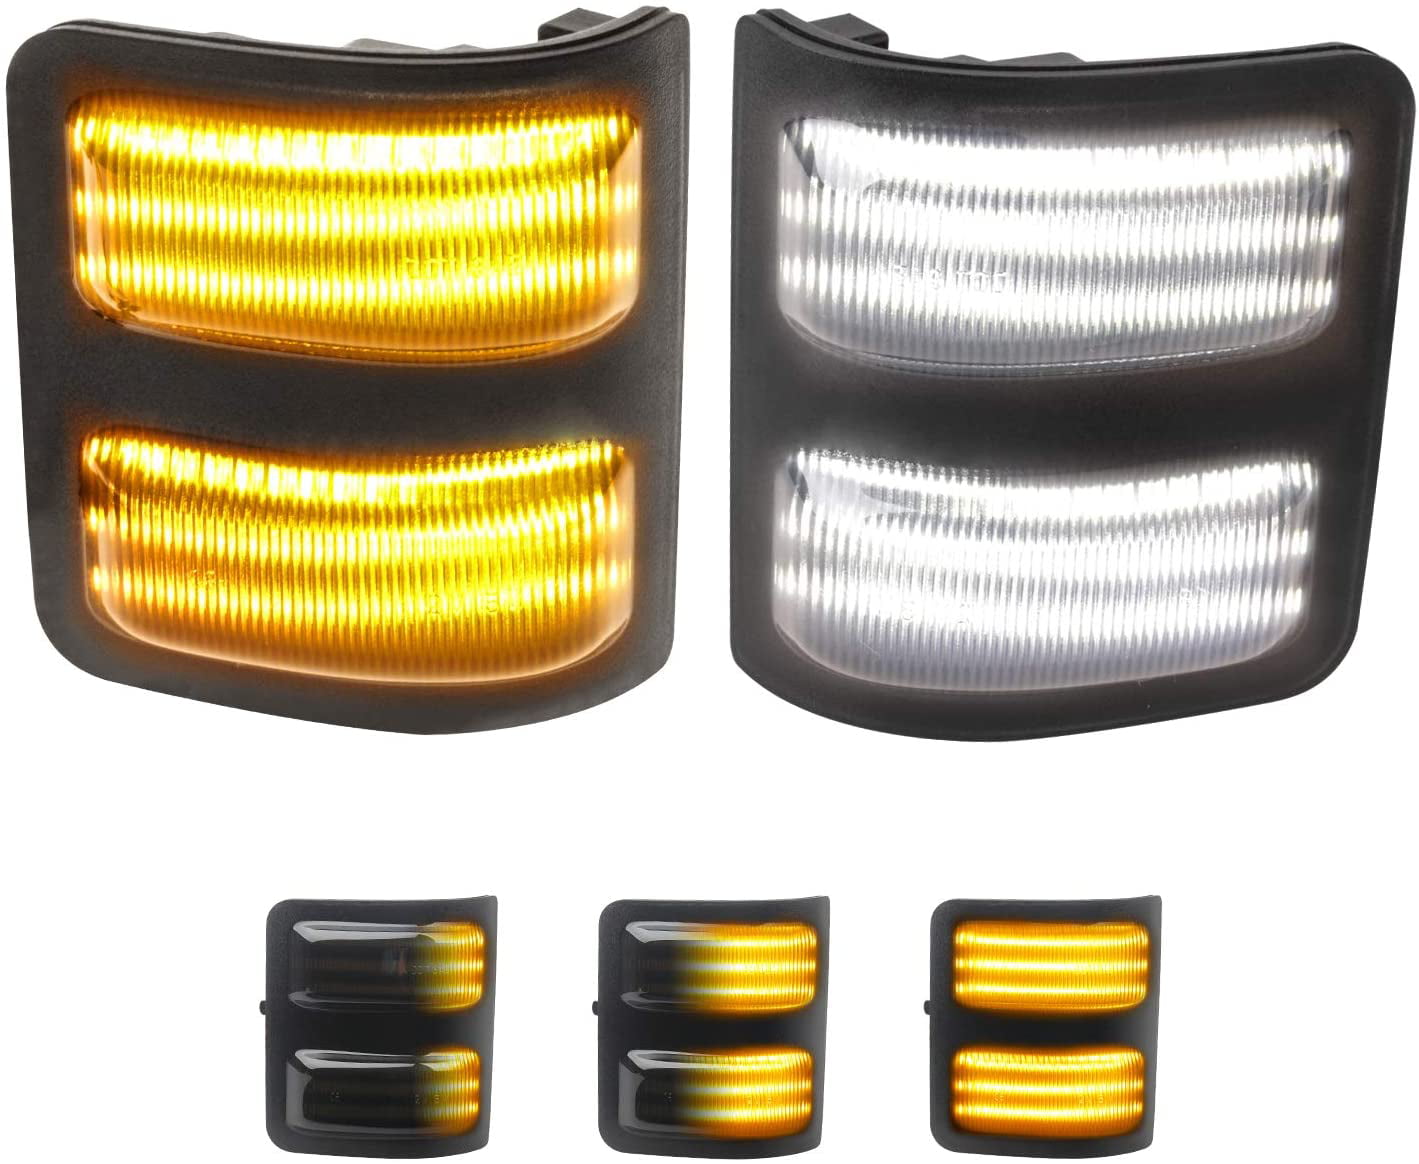 Smoked Lens, White Parking Amber Turn Signal Light 1 Pair Switchback LED Side Mirror Marker Lamps Compatible with 2008-2016 Ford F250 F350 F450 Super Duty 